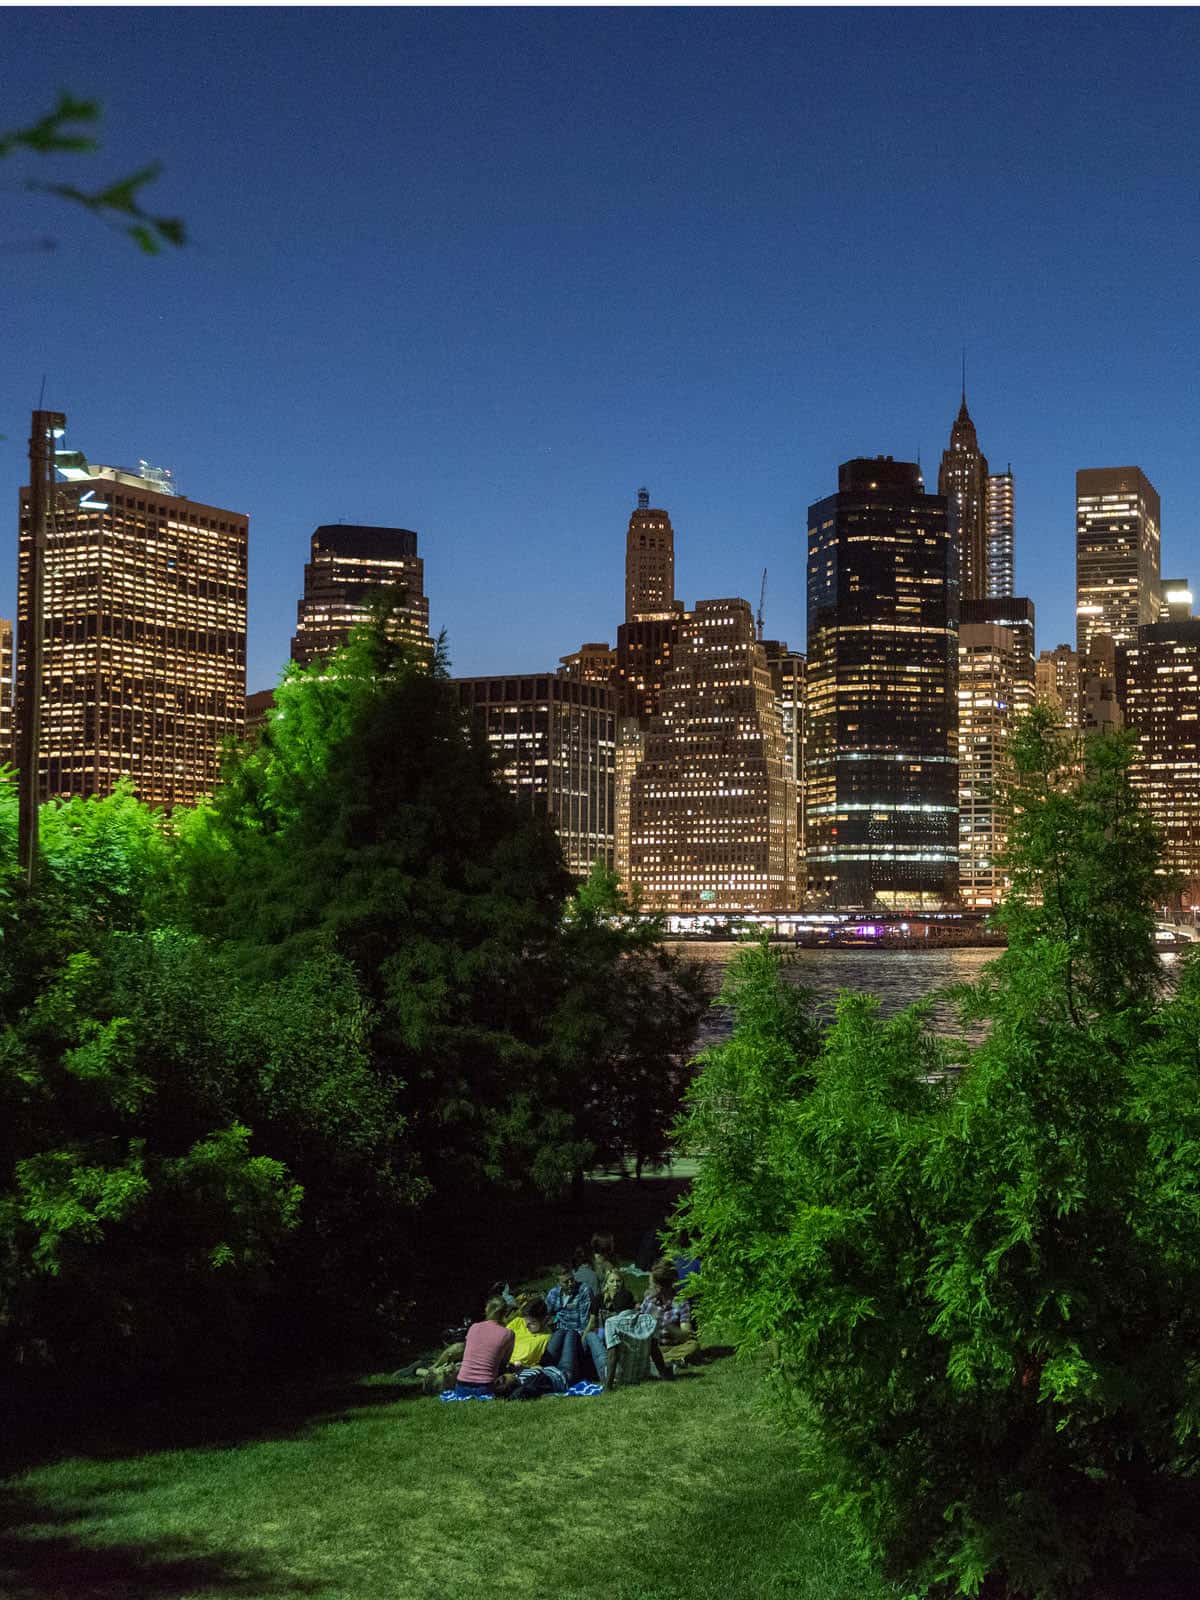 Group sitting on the lawn in between trees at night. View of lower Manhattan in the background.